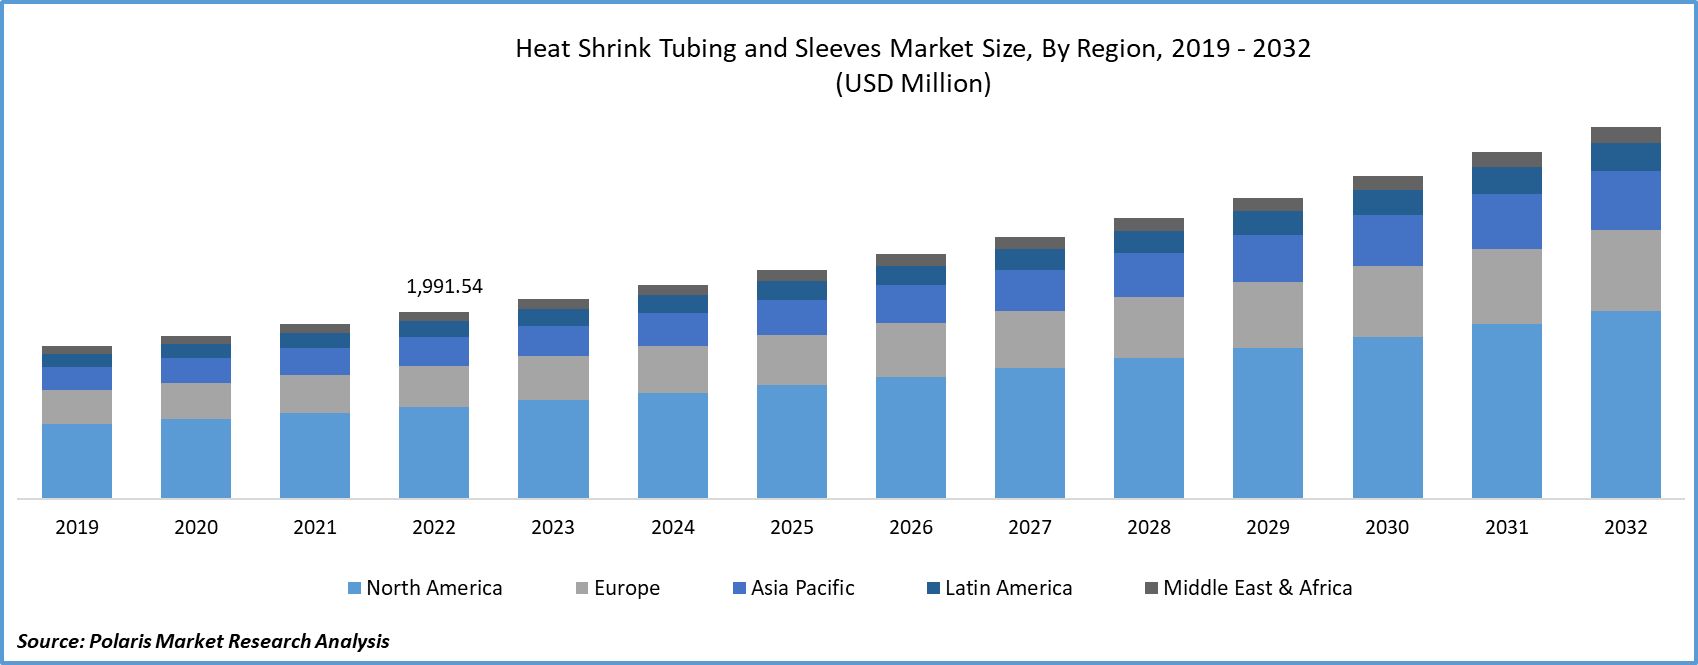 Heat Shrink Tubing and Sleeves Market Size